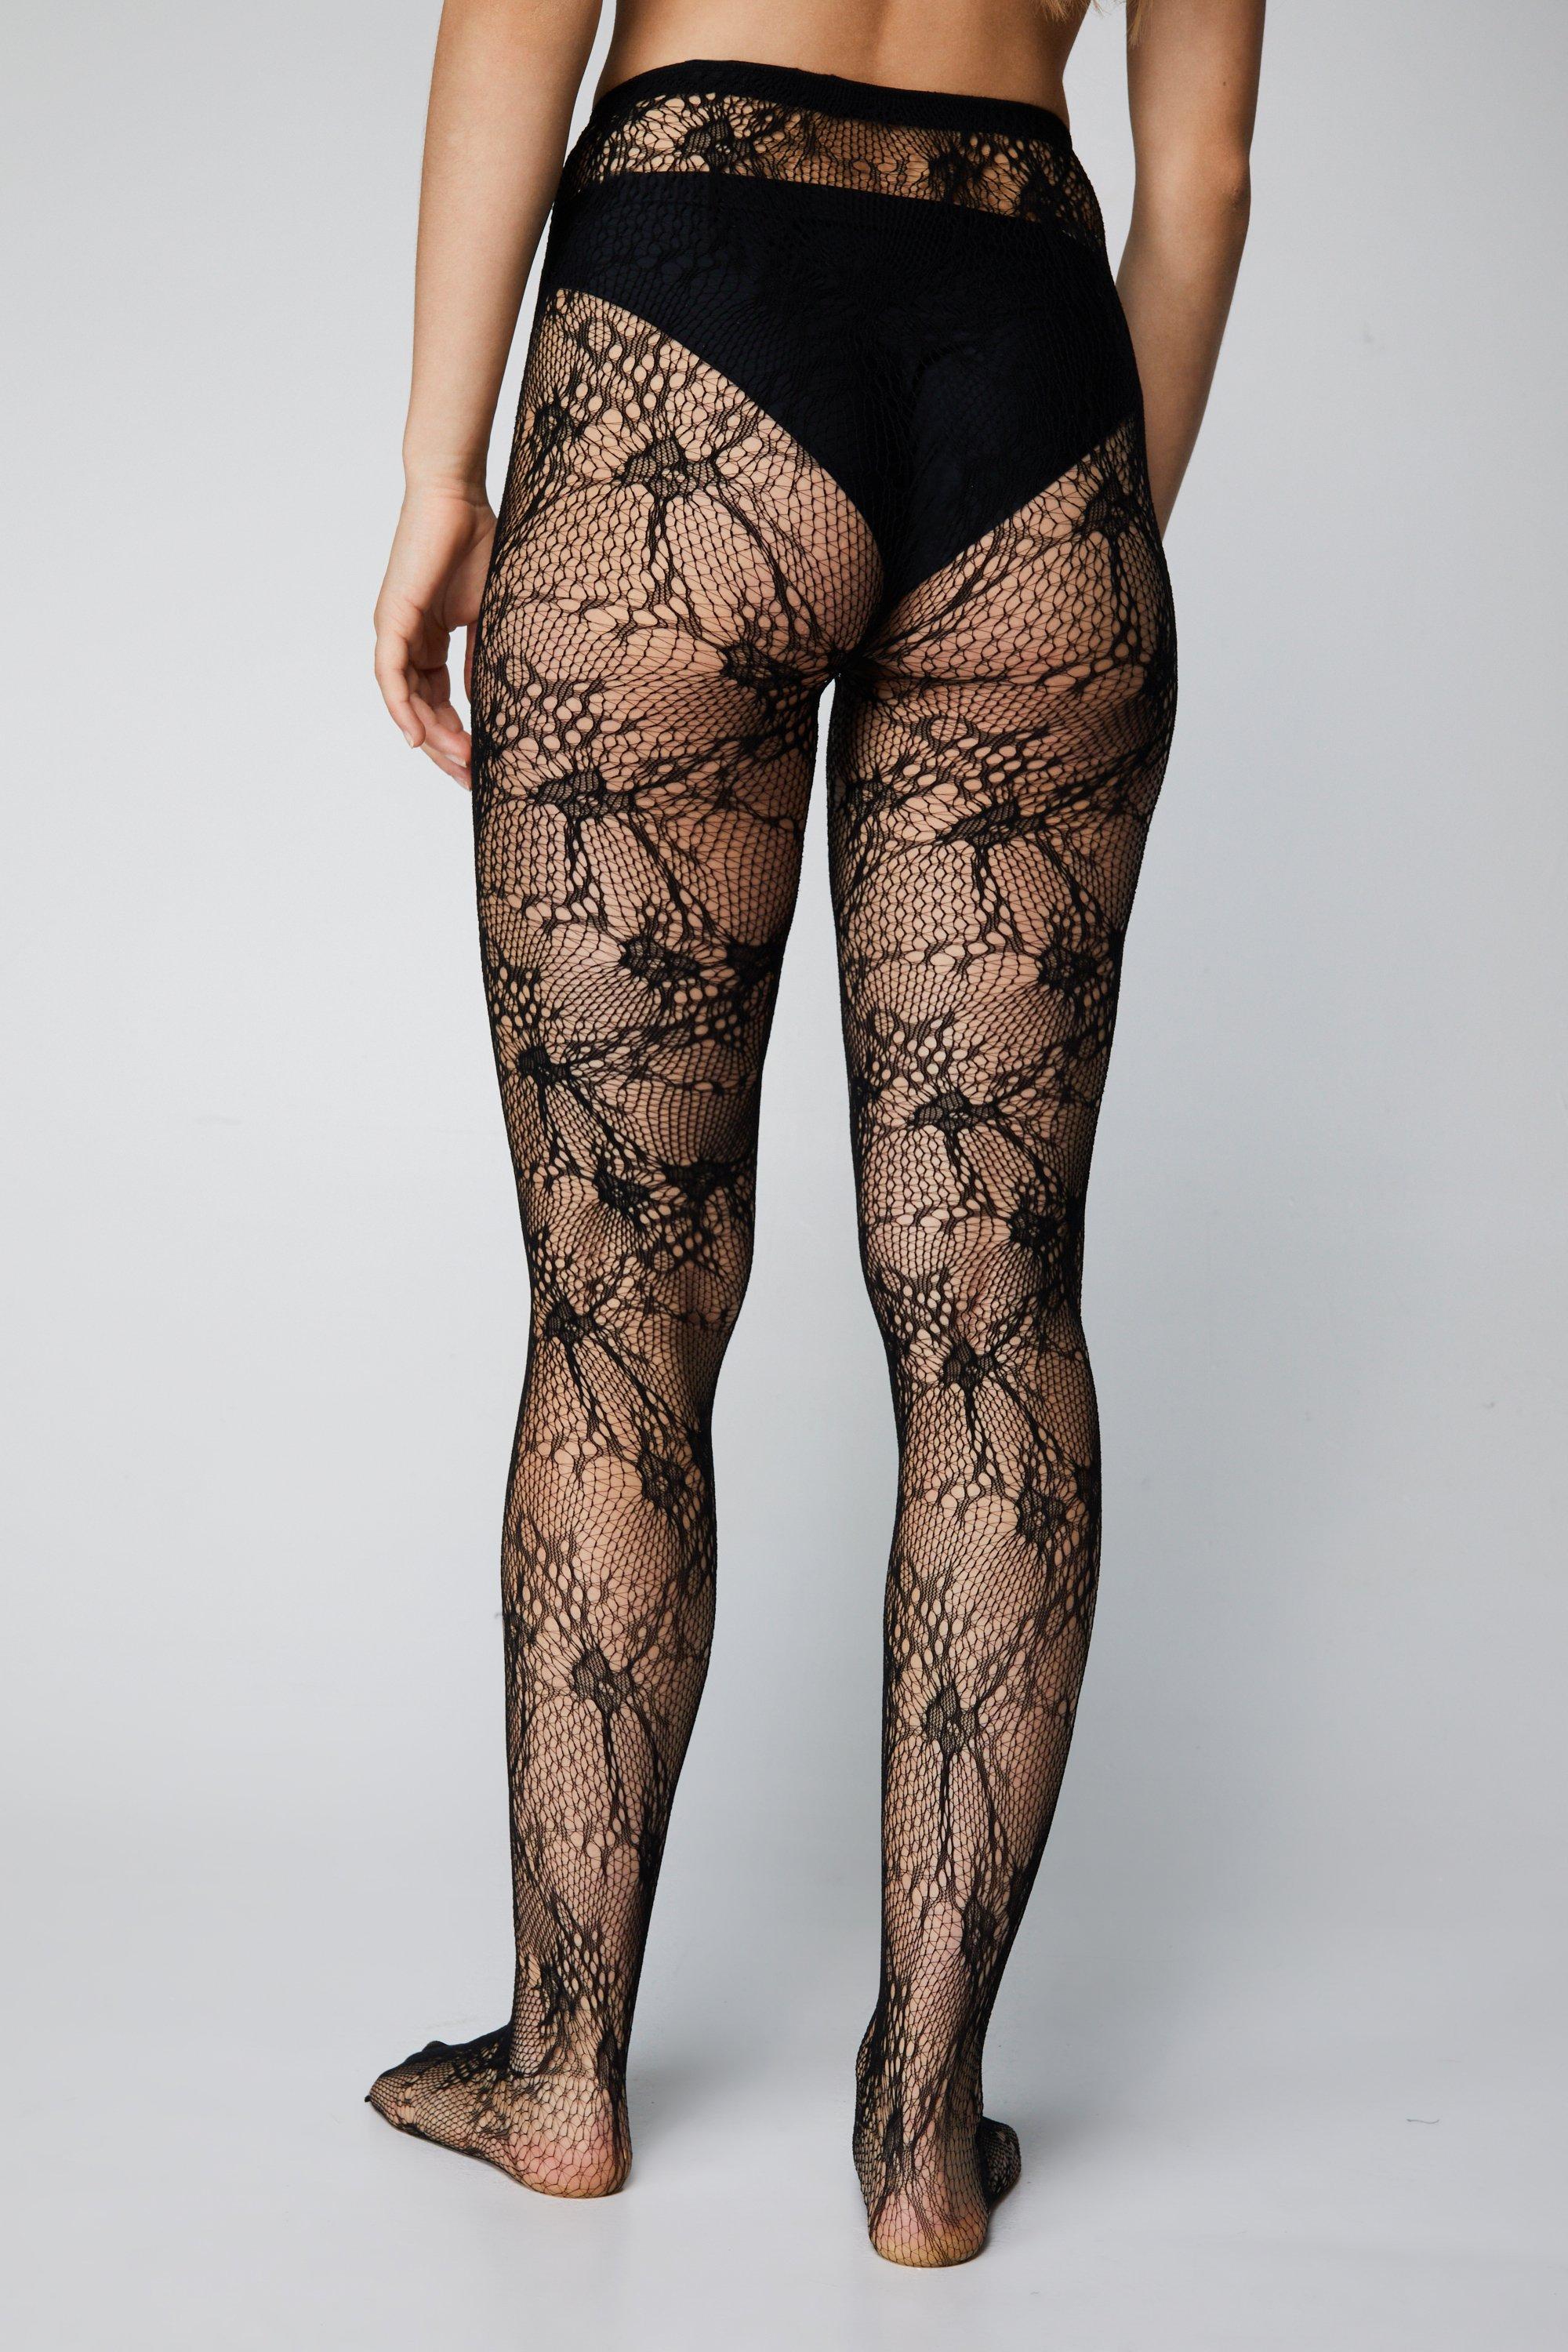 Pretty Polly Floral Lace Tights - Black